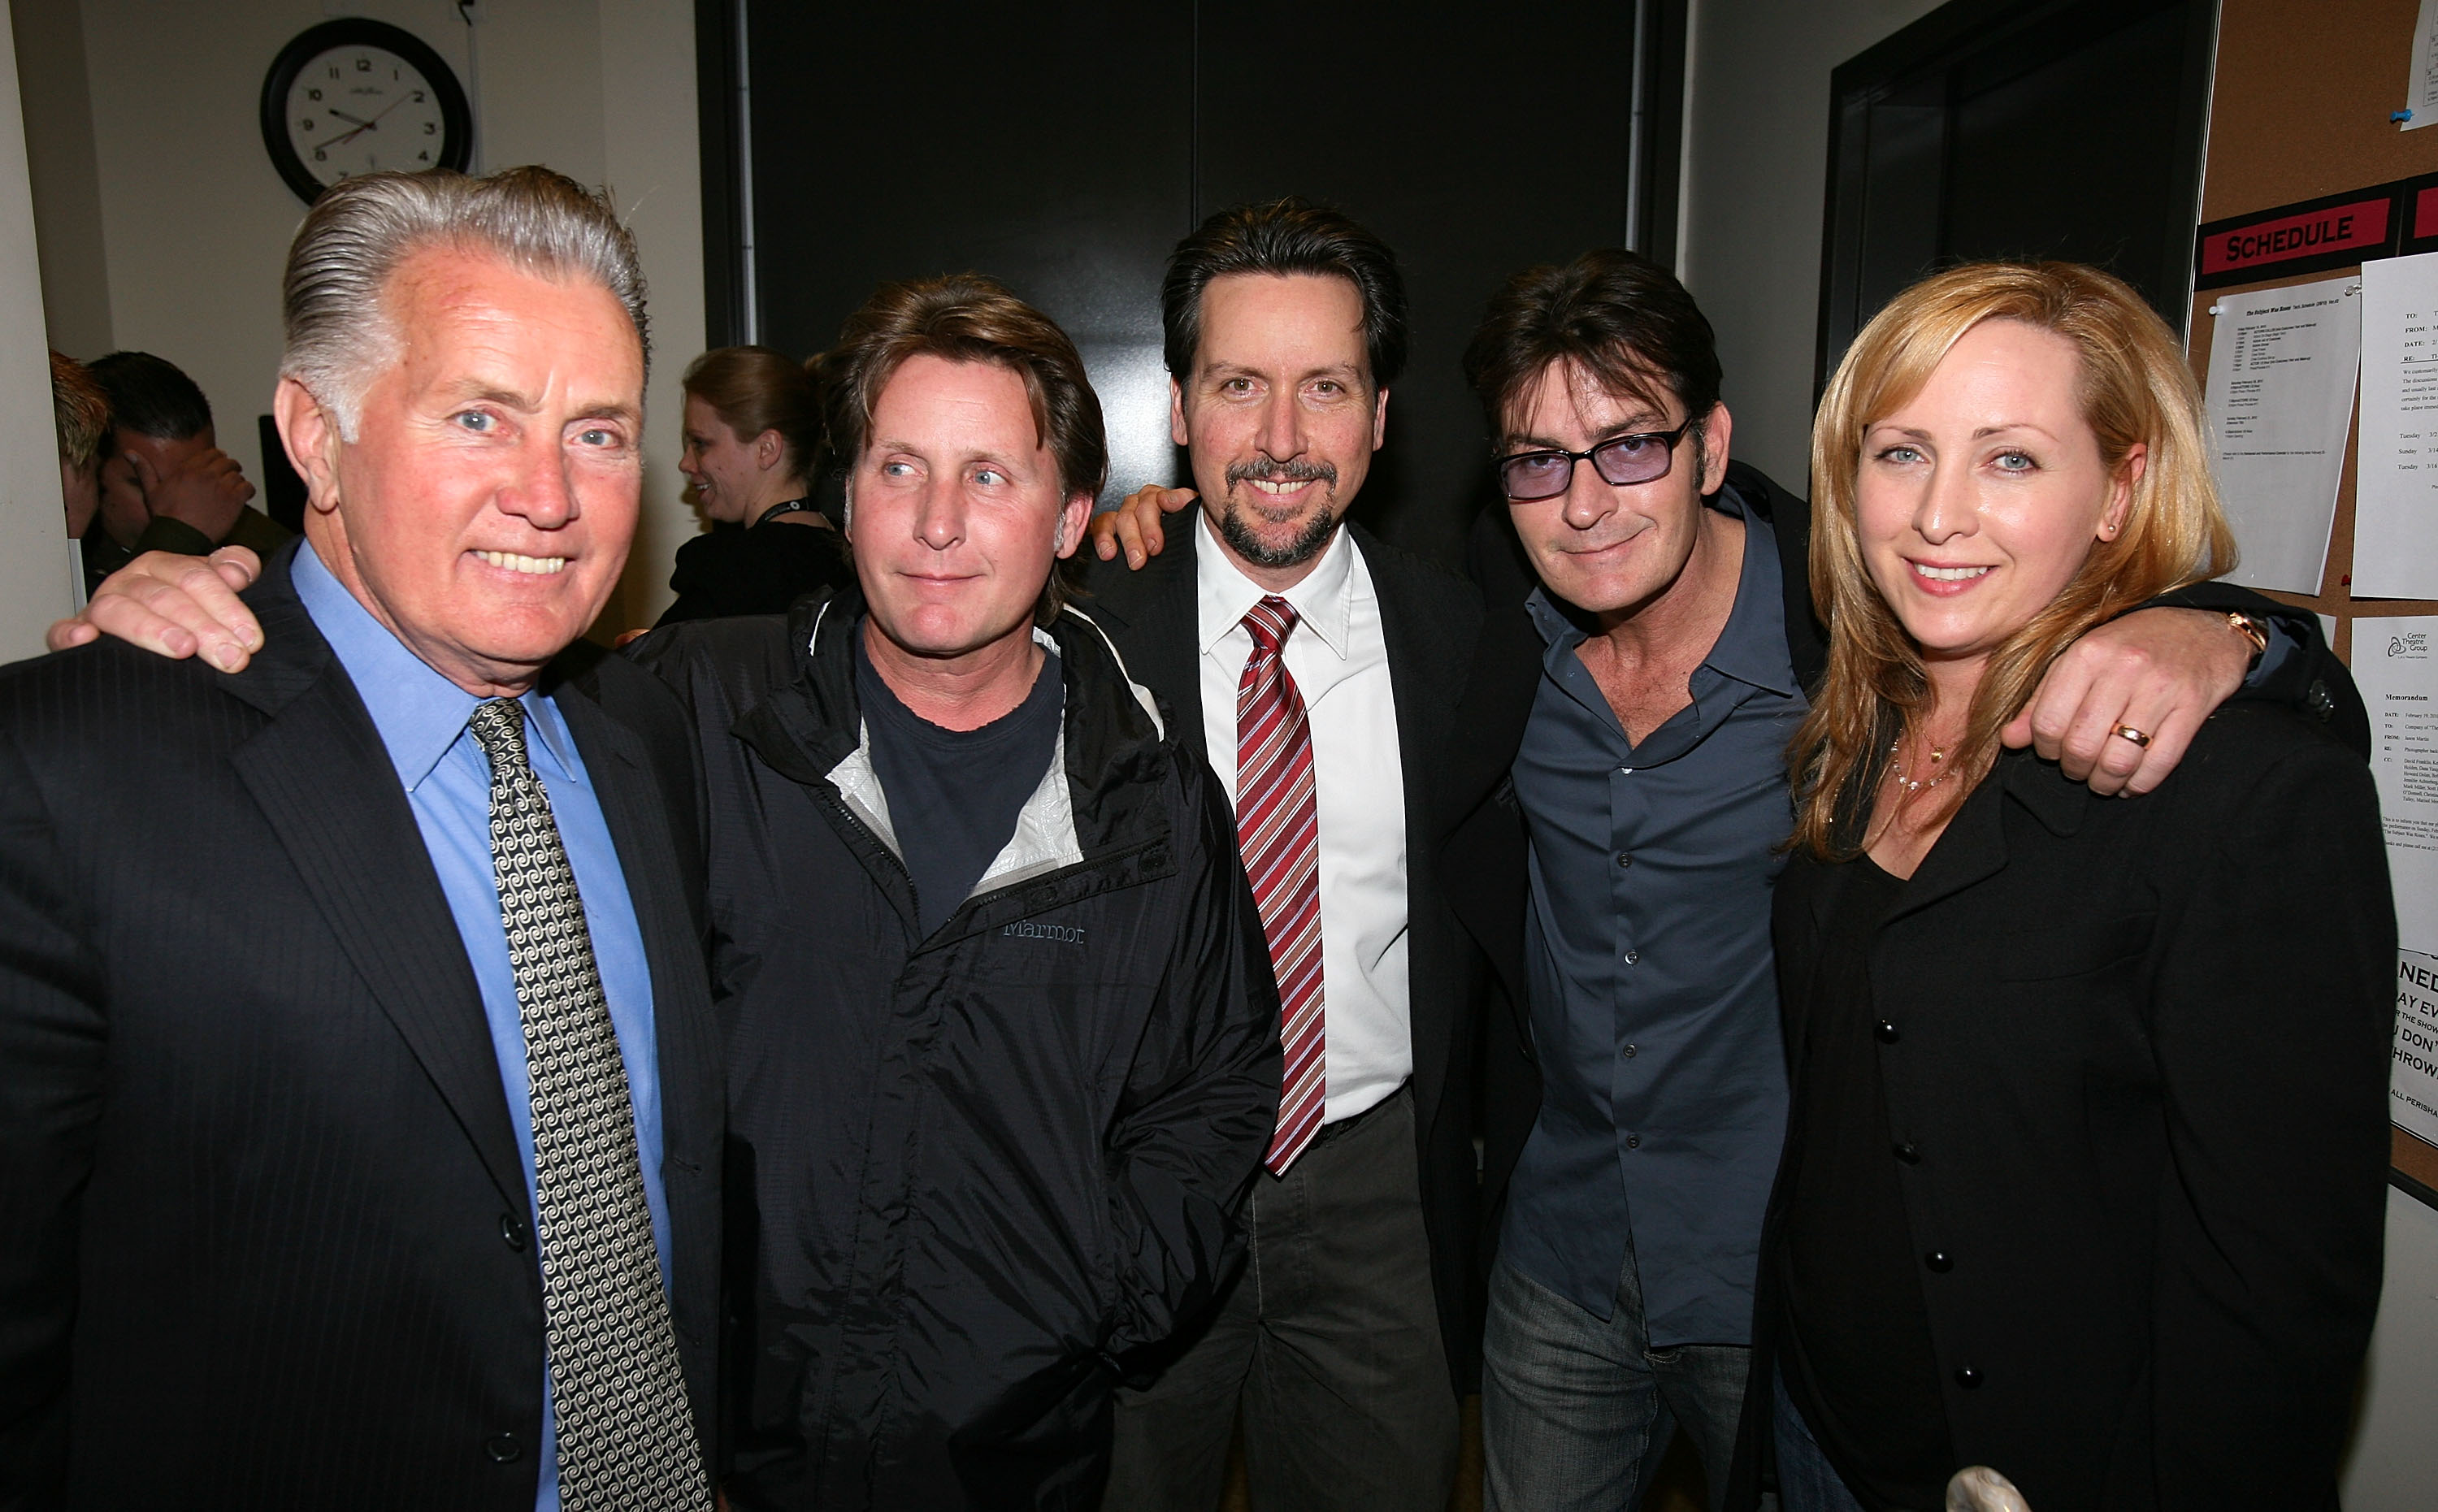 Martin Sheen poses with his children Emilio, Ramon, Charlie, and Renee after the opening night performance of "The Subject Was Roses" on February 21, 2010 in Los Angeles, California | Source: Getty Images